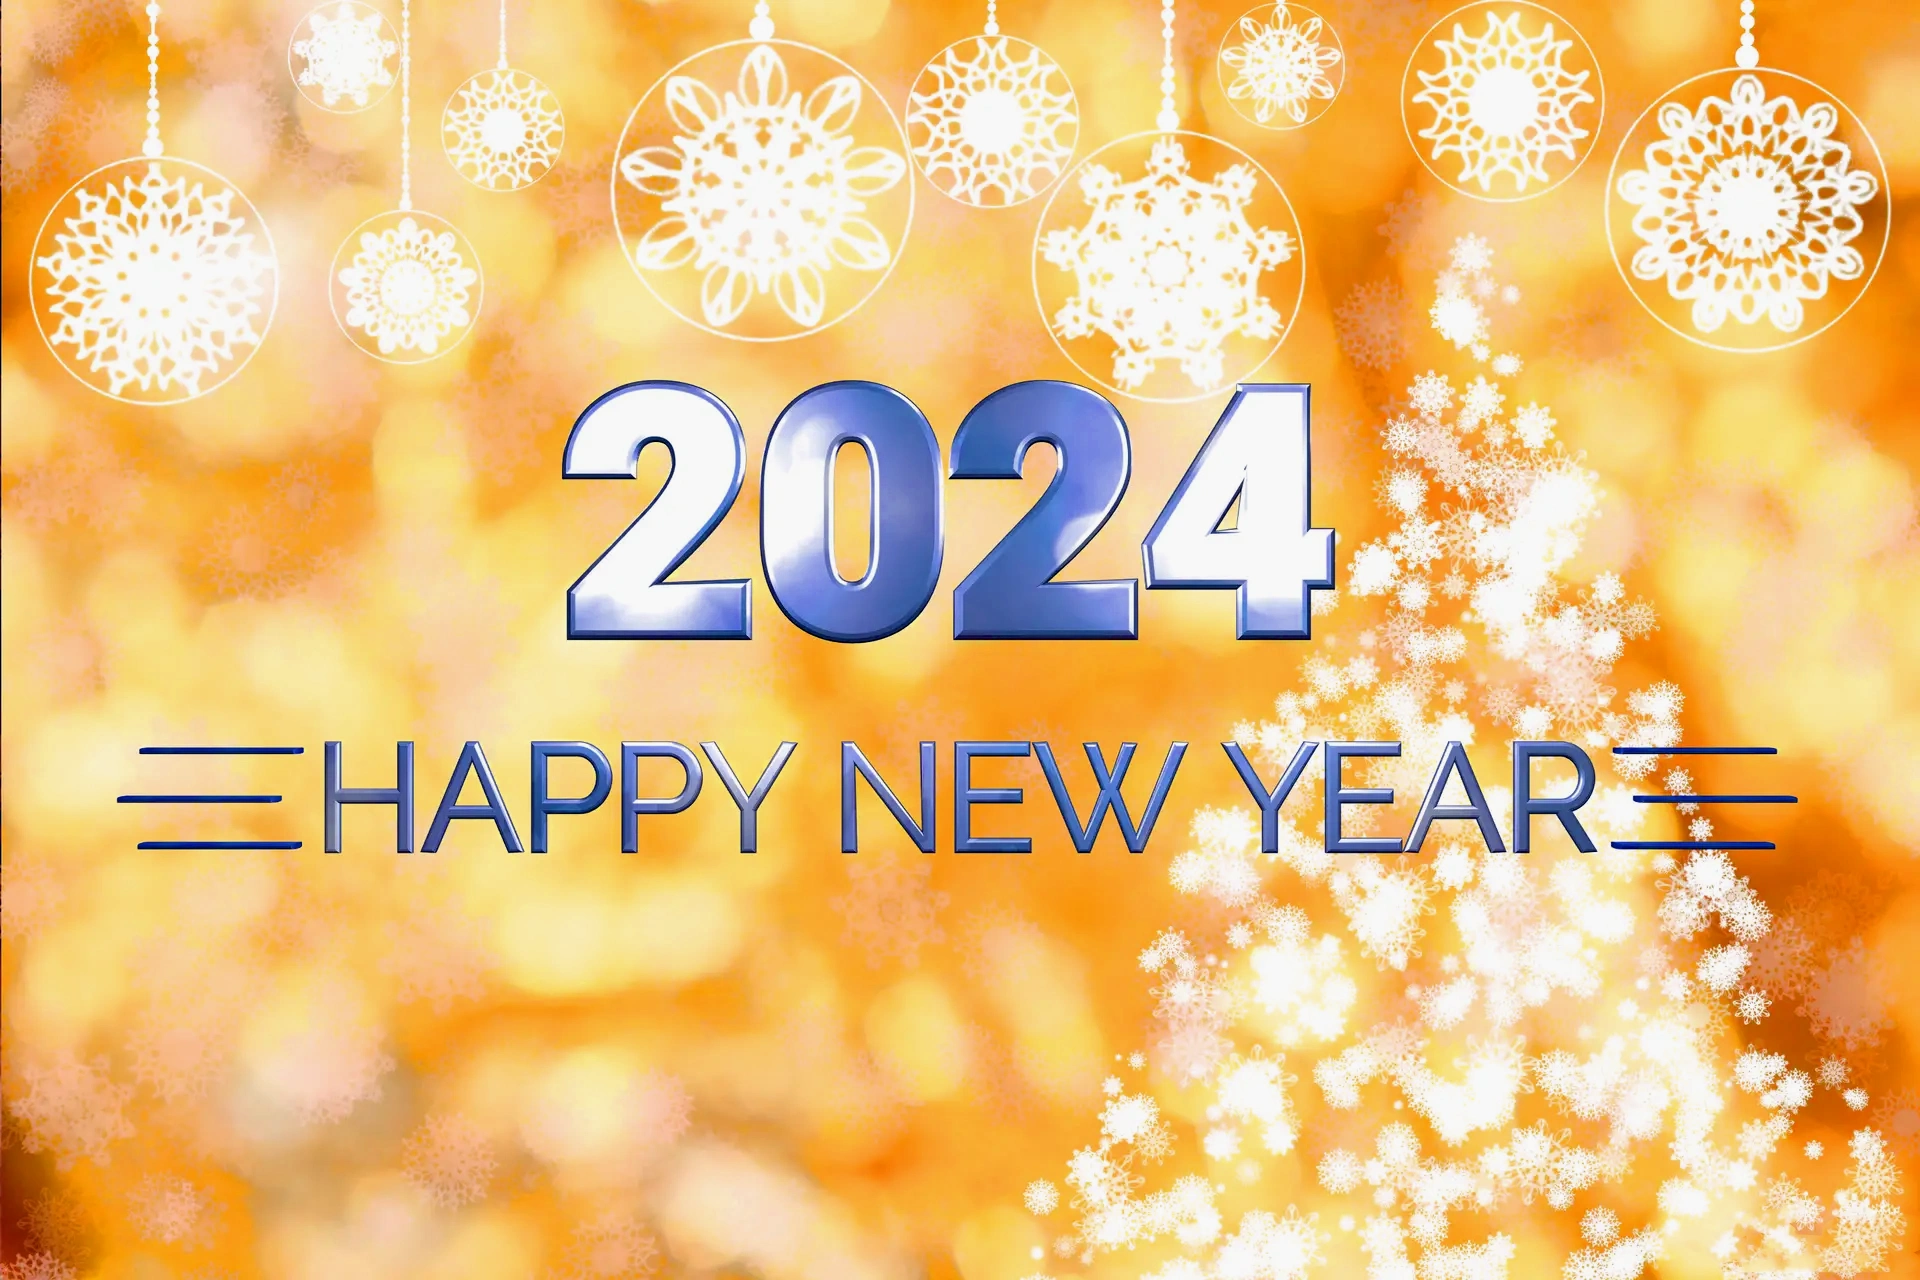 Happy New Year 2024 Quotes and images free download